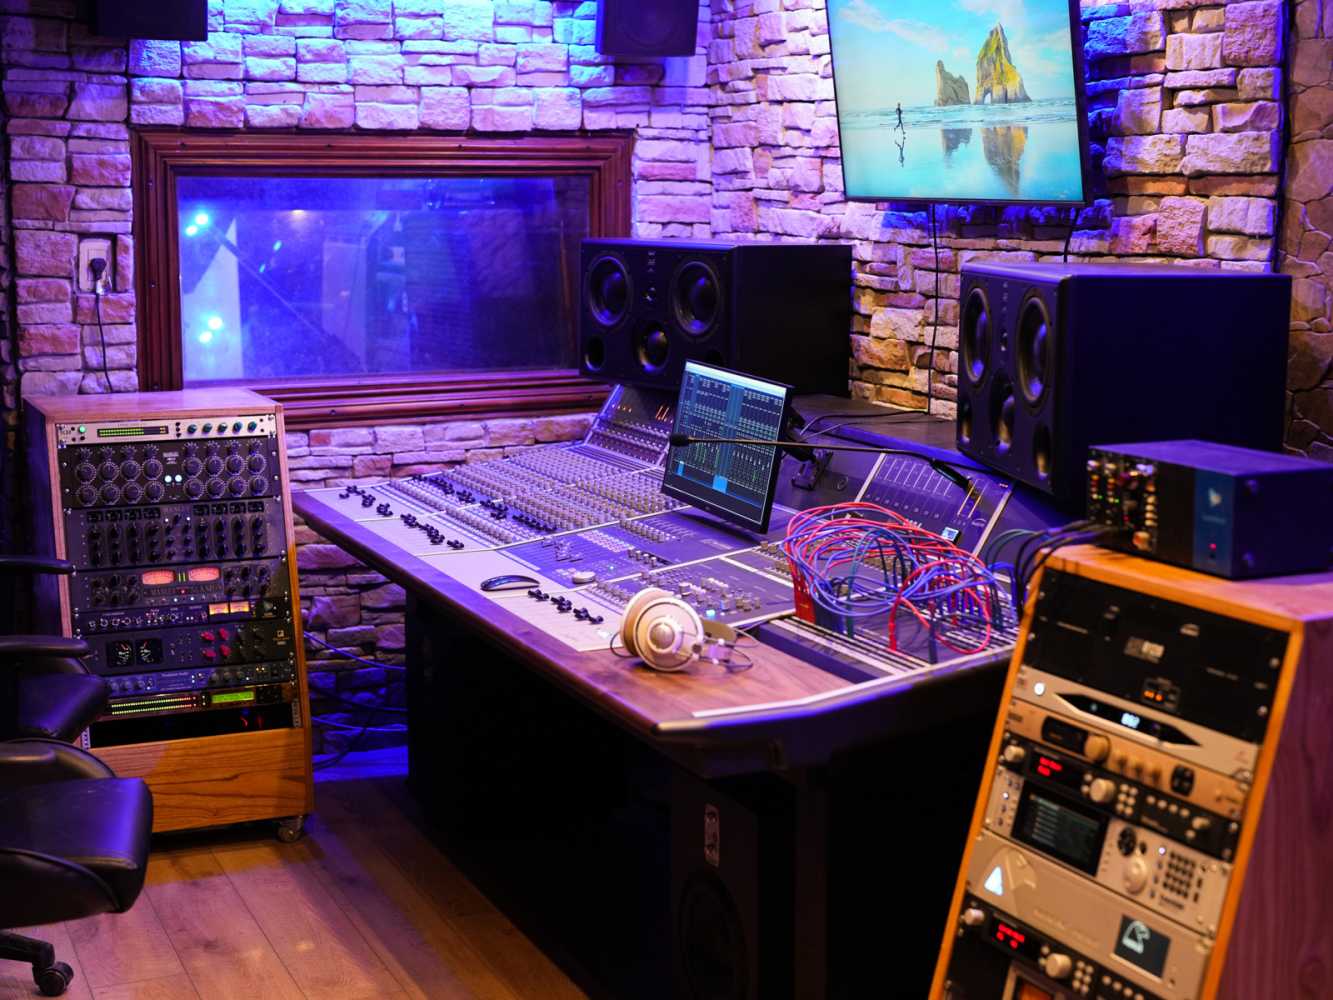 Hard Record Studiois based in Arrecifes, a small town near Buenos Aires